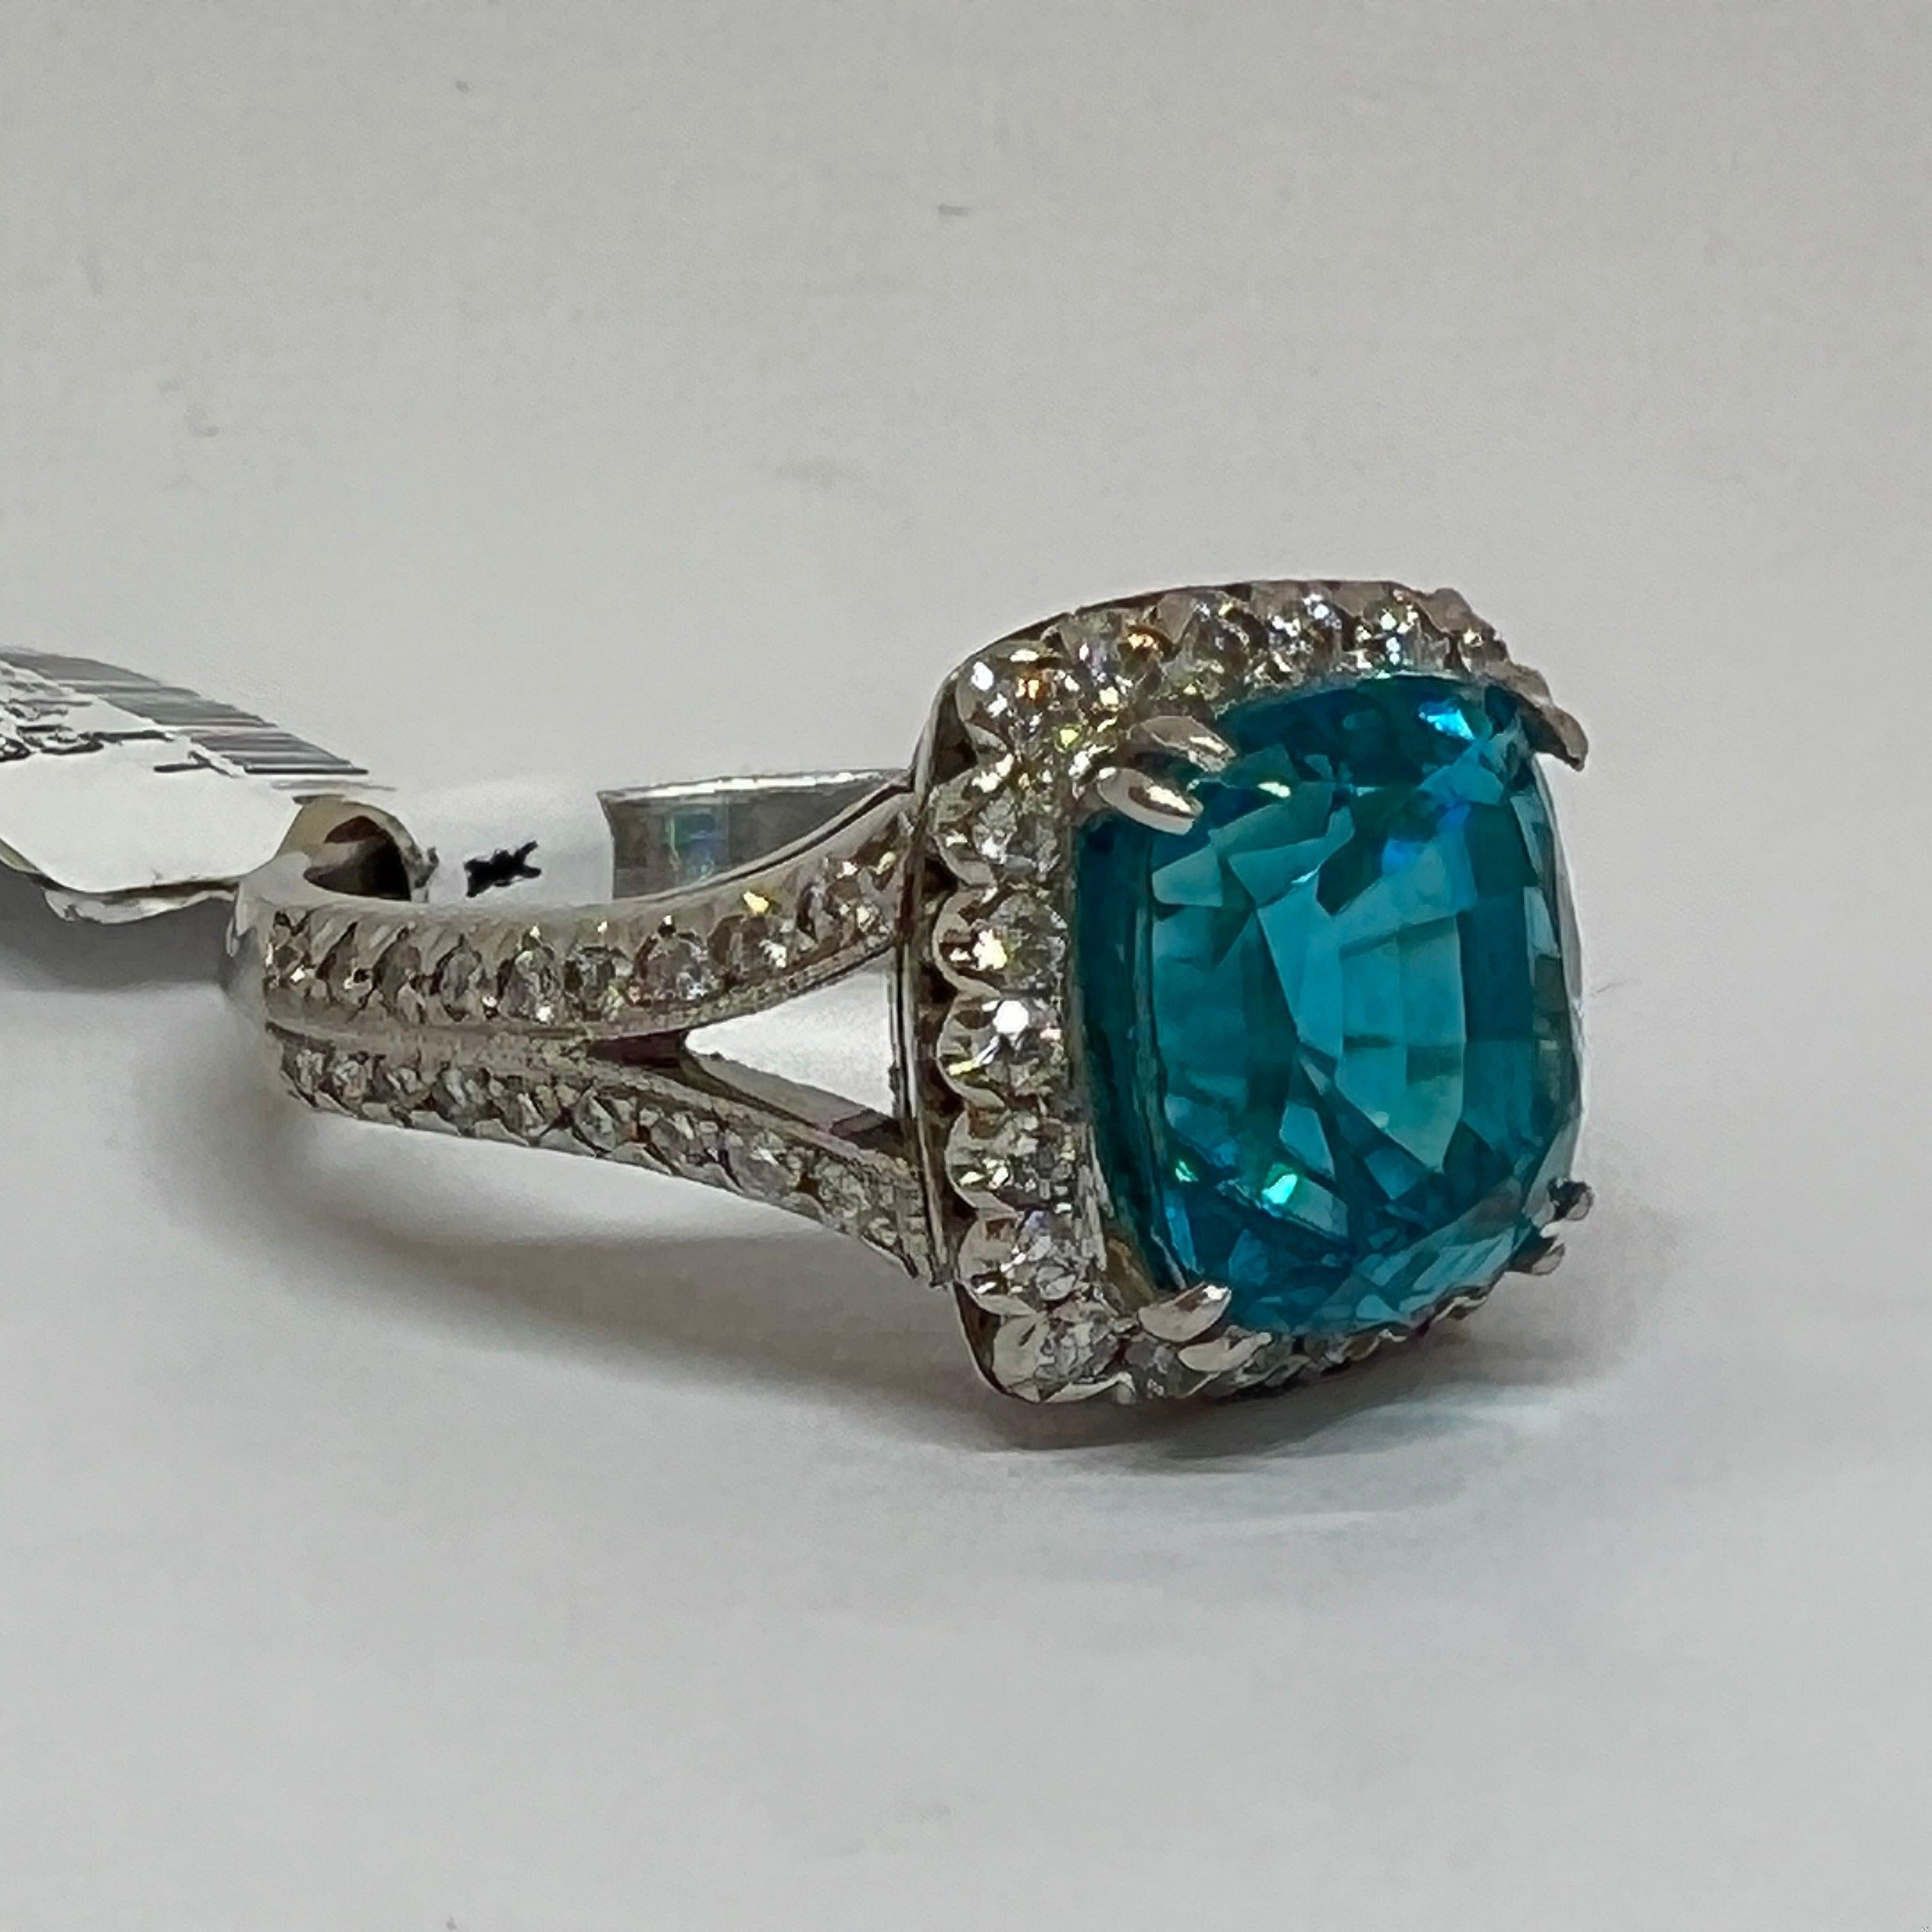 Hand fabricated by Mark Areias Jewelers in solid Platinum set with beautiful diamonds and a cushion shape natural blue zircon gemstone. The diamonds rate VS clarity, F-G color with a total weight of 0.70 carats. The lagoon colored blue zircon weighs